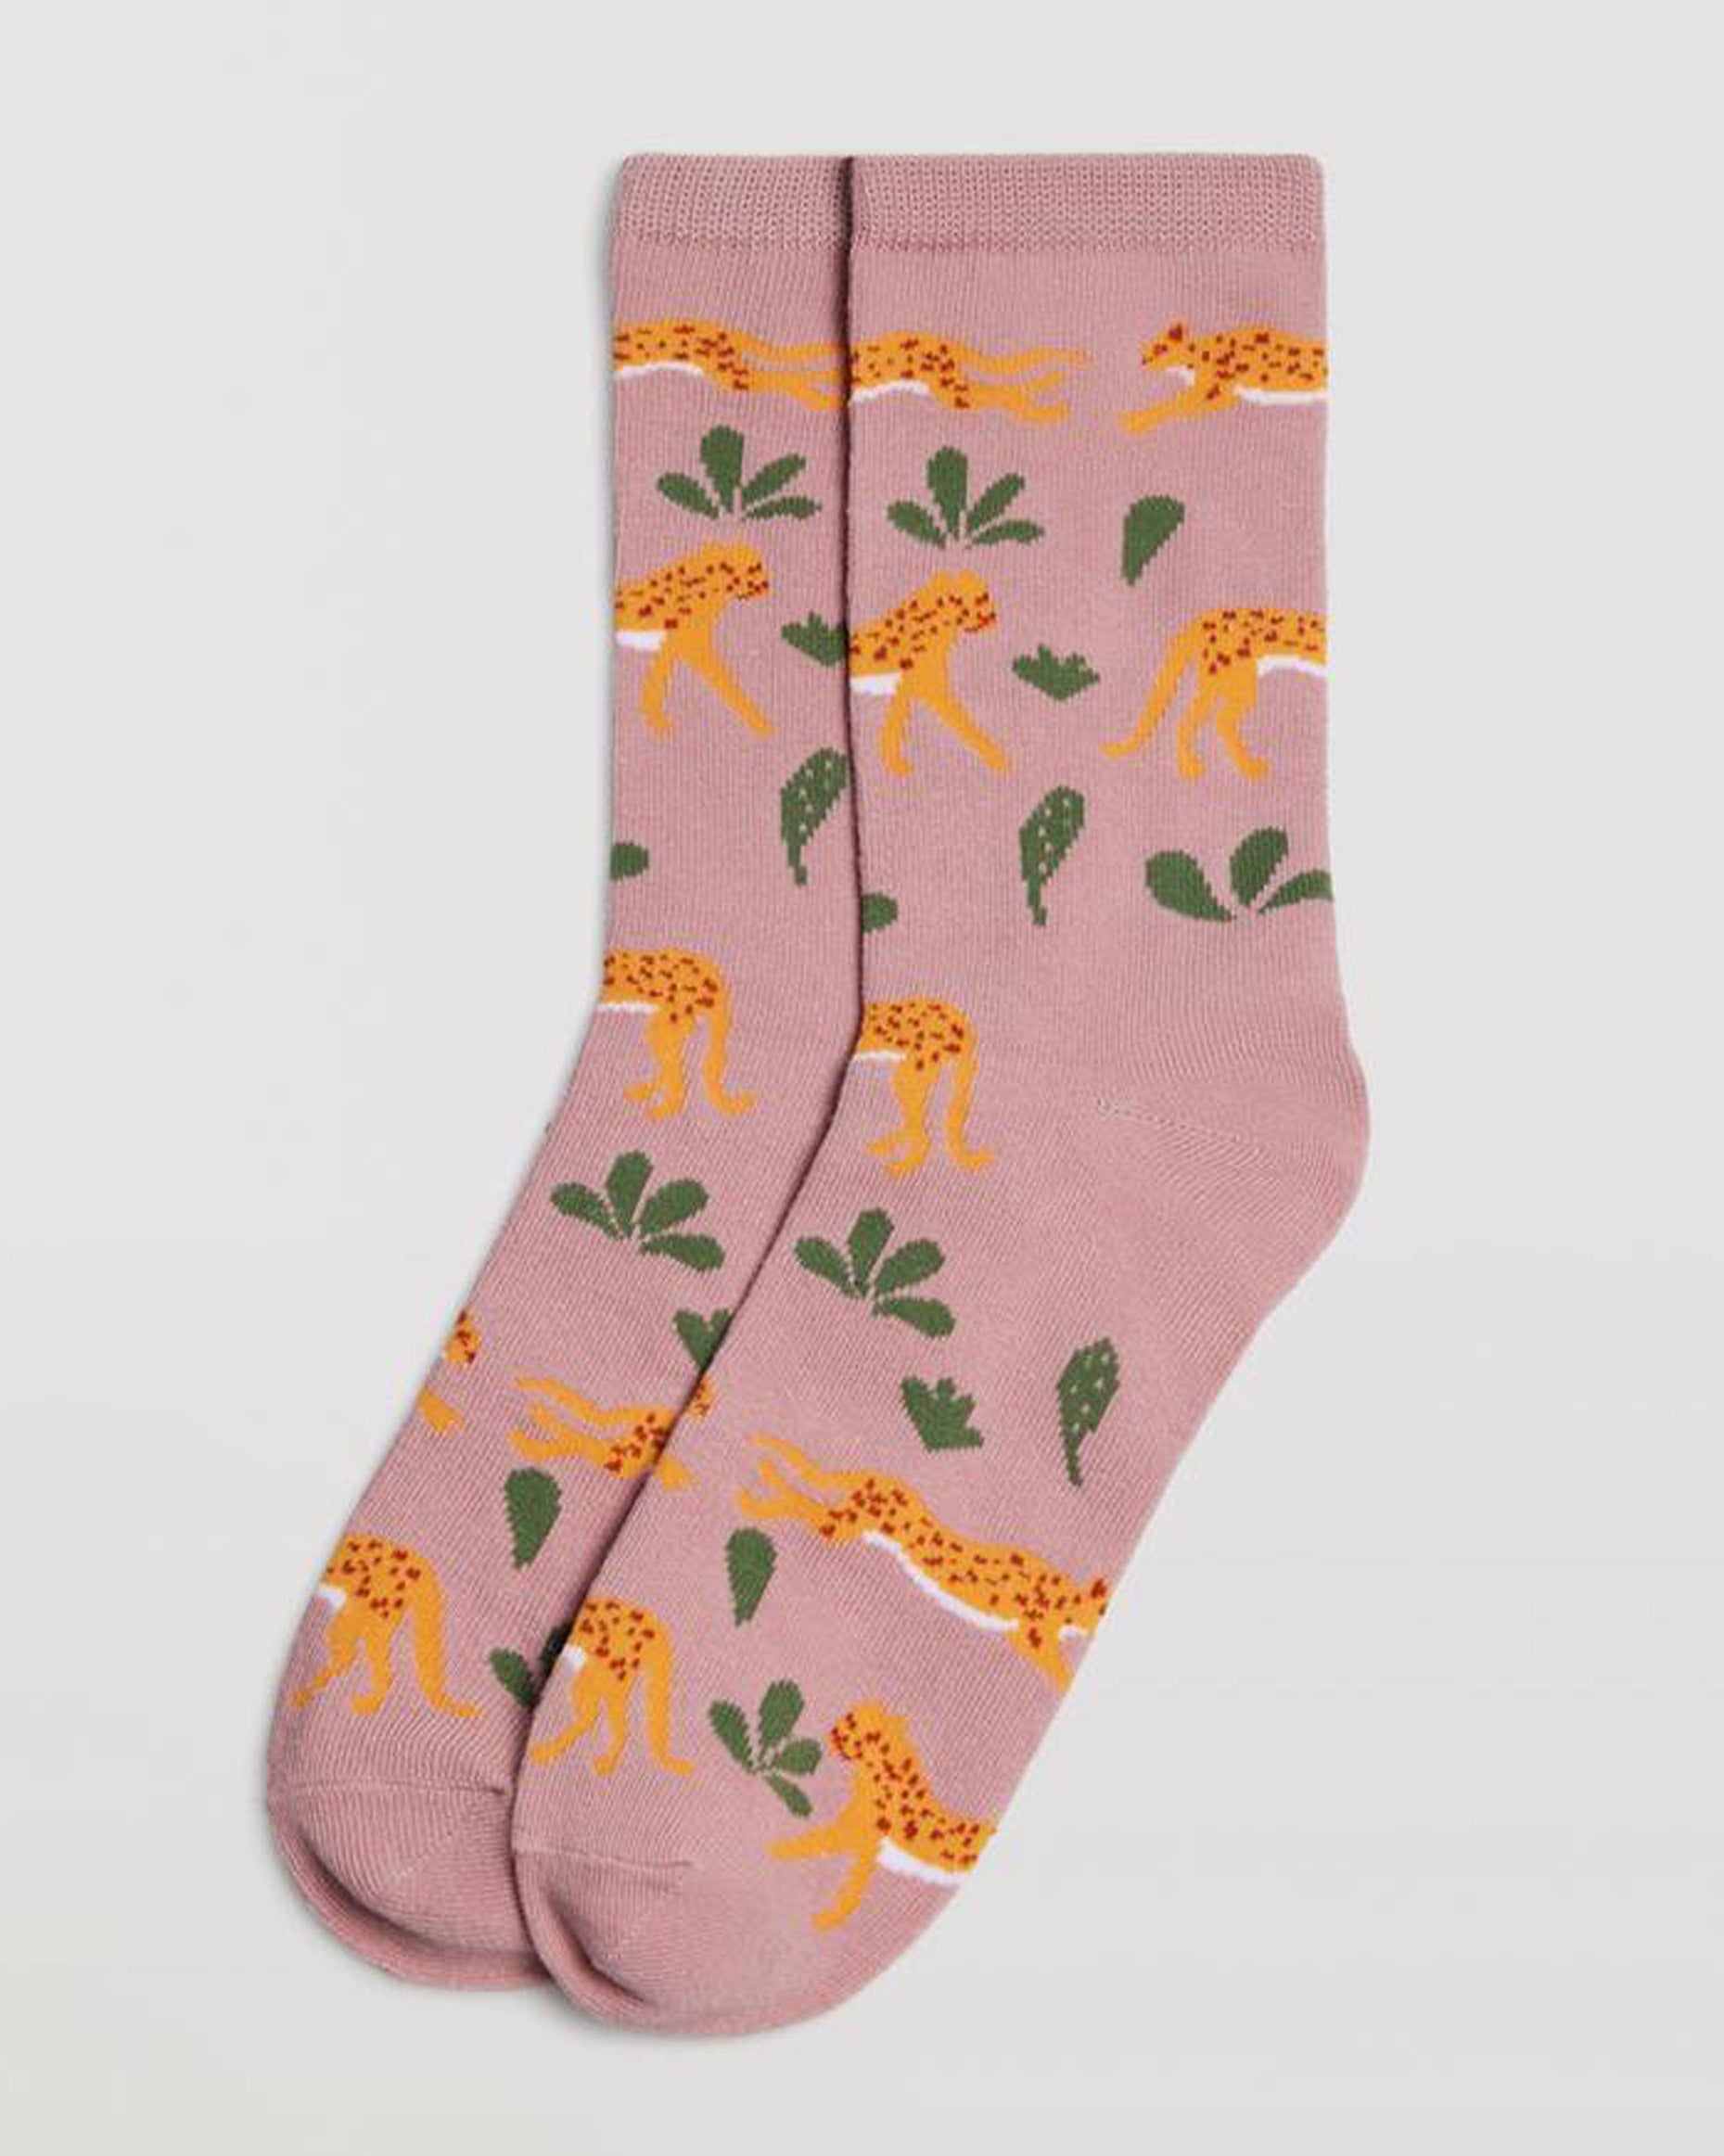 Ysabel Mora 12875 Cheetah Socks - Pale pink cotton crew socks with a pattern of cheetahs in mustard, white and wine and green cactus leaves, shaped heel, flat toe seam and plain elasticated cuff.